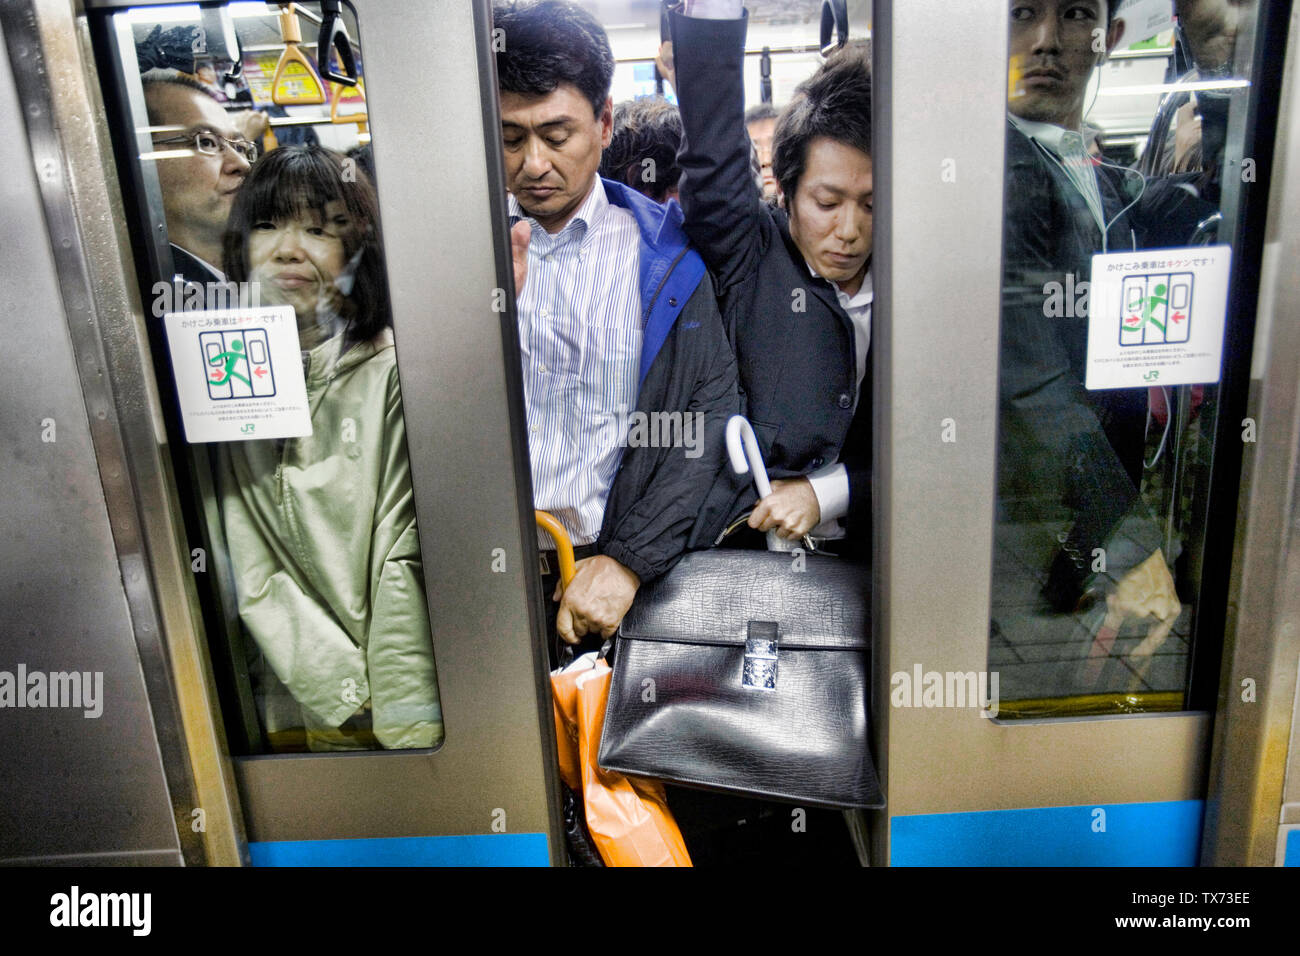 Crowded carriage Tokyo subway, Japan Stock Photo